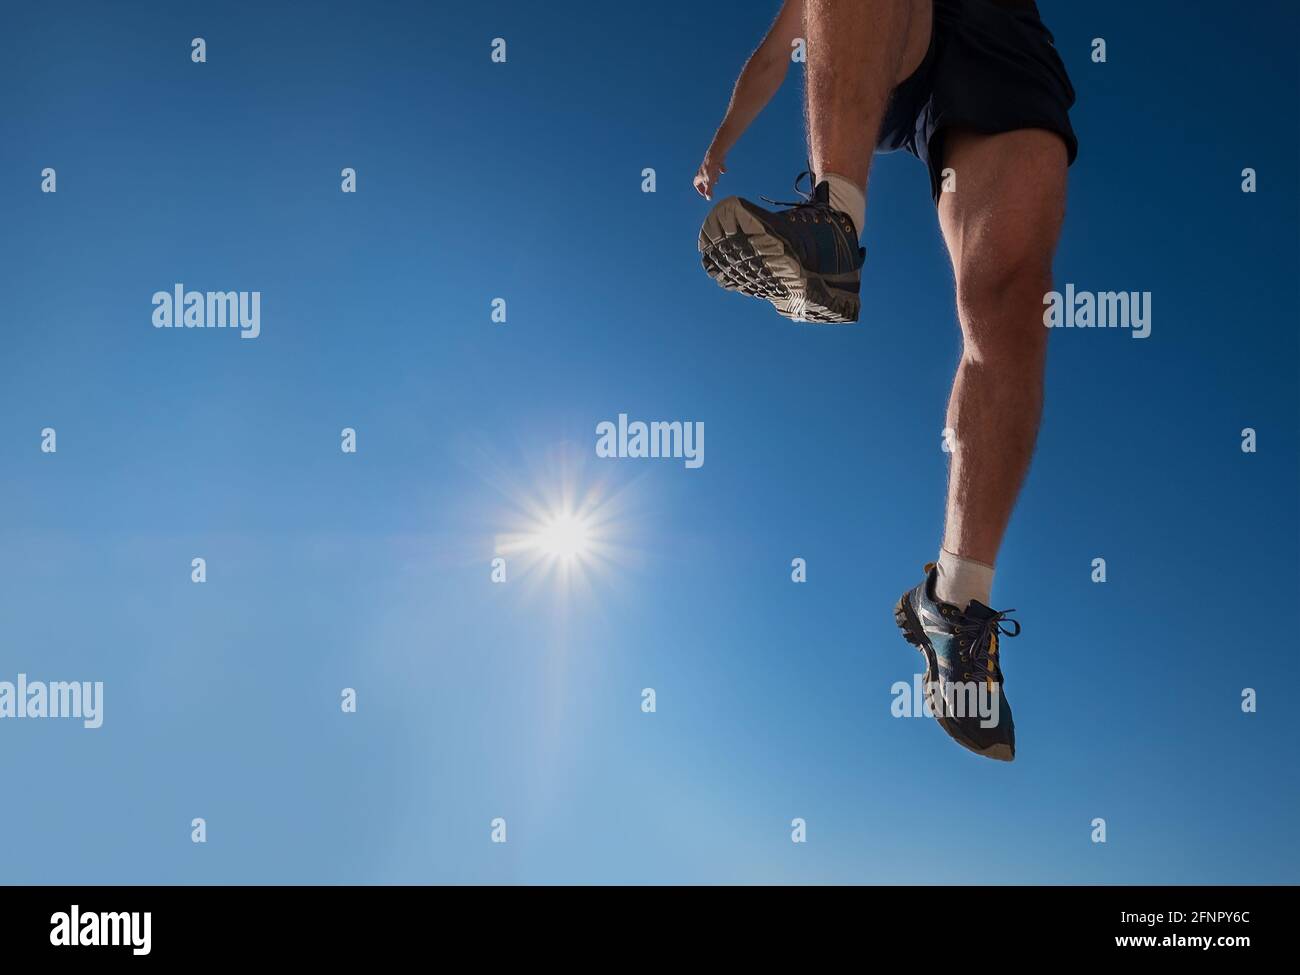 Flying jumping runner on the blue sky with bright sun background. and over the  Sporty Active people activities a wide-angle concept image. Stock Photo